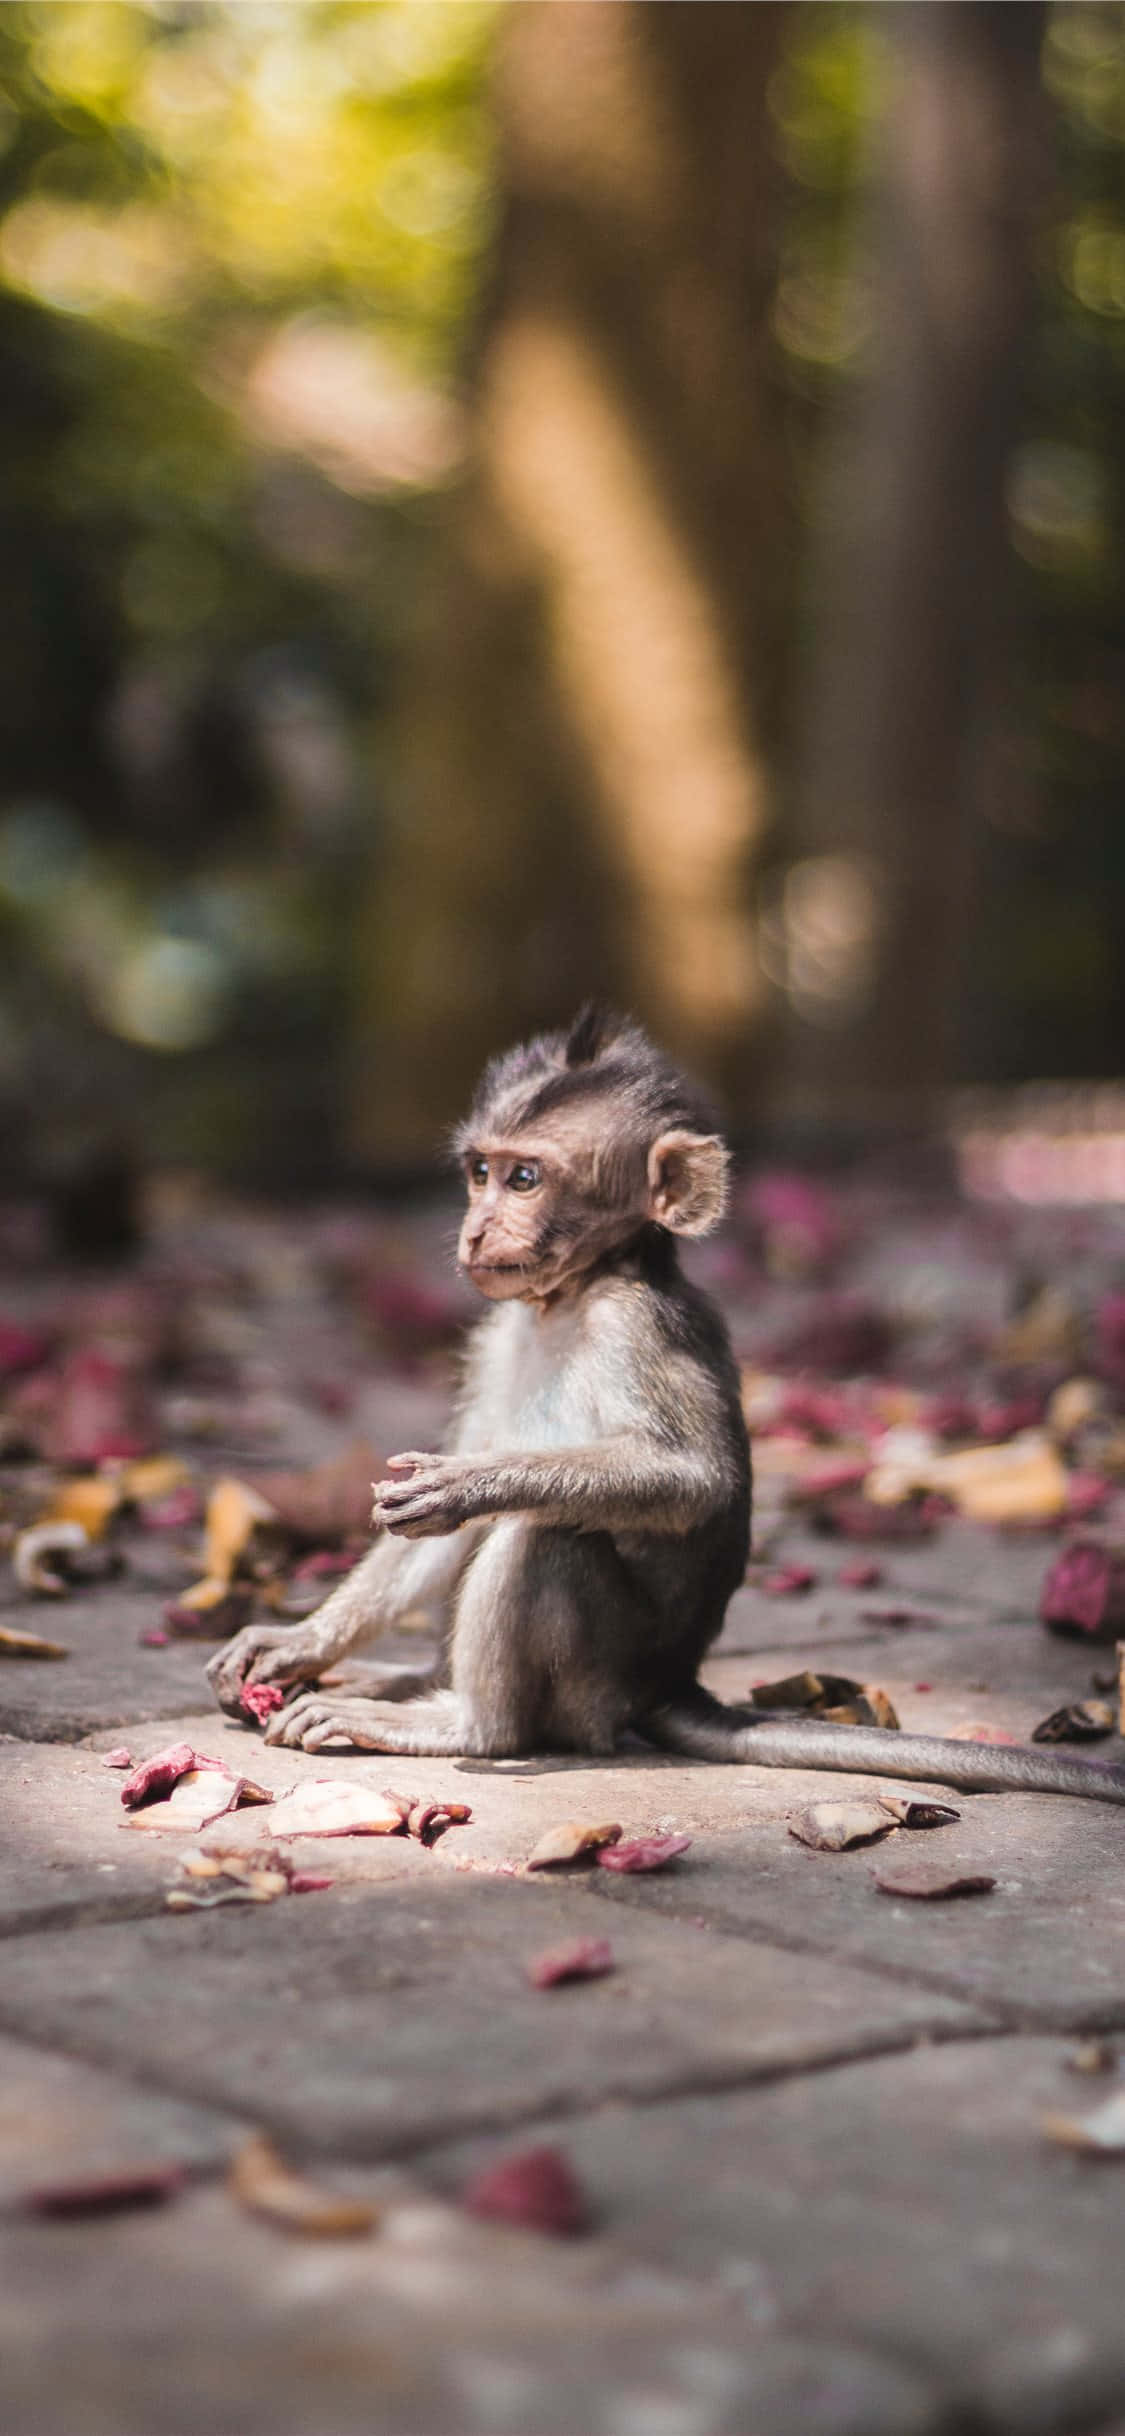 A Sweet Little Monkey with an Adorable Expression